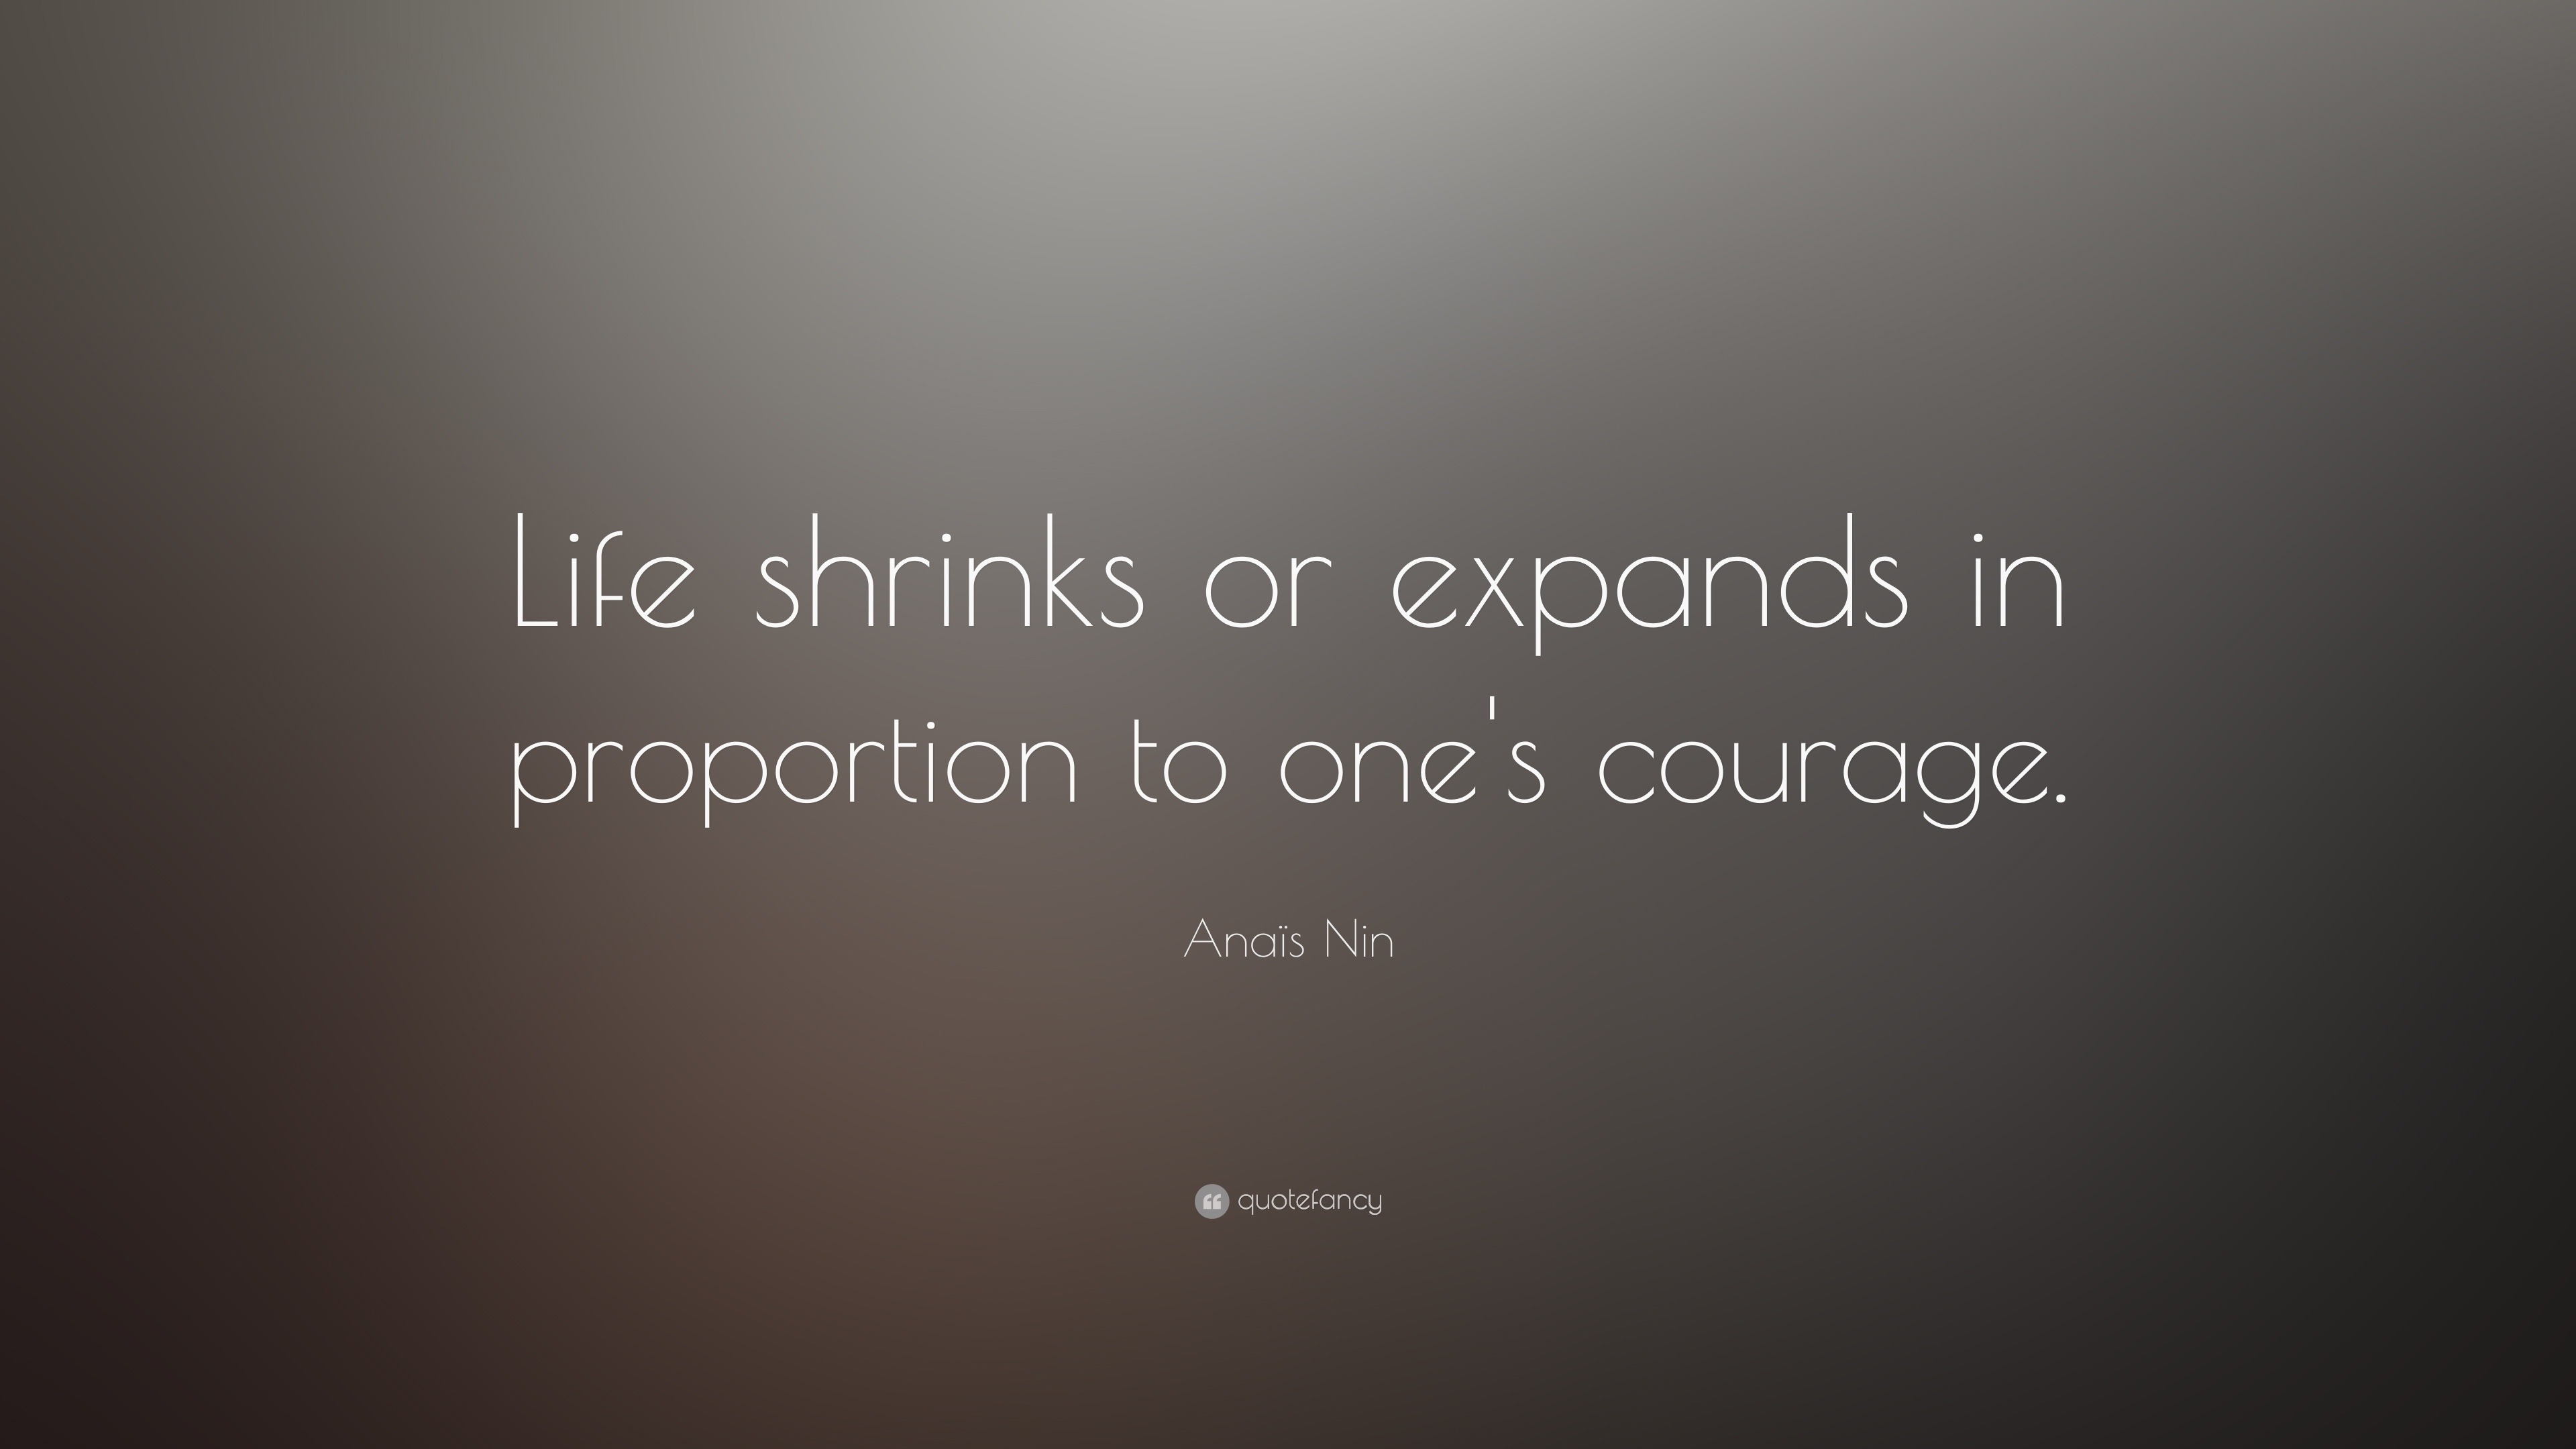 Anaïs Nin Quote: “Life shrinks or expands in proportion to one’s courage.”